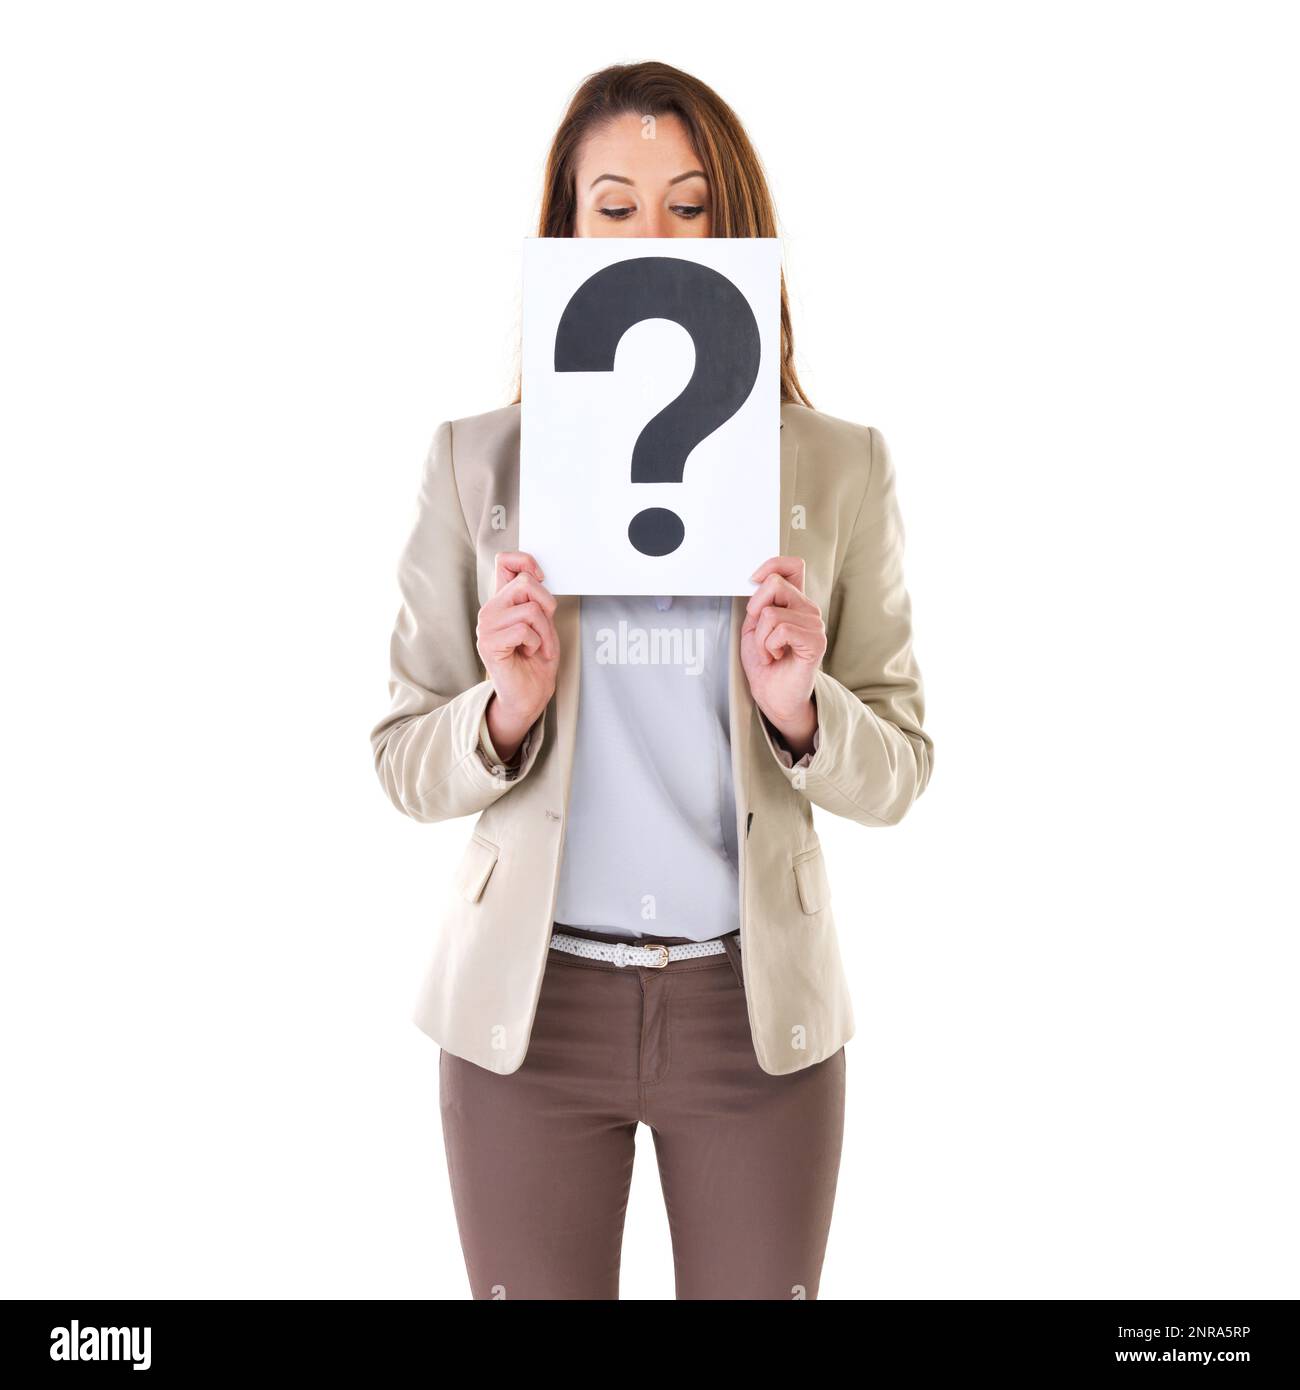 Curious So am I. Studio shot of a young businesswoman holding a placard with a question mark on it. Stock Photo